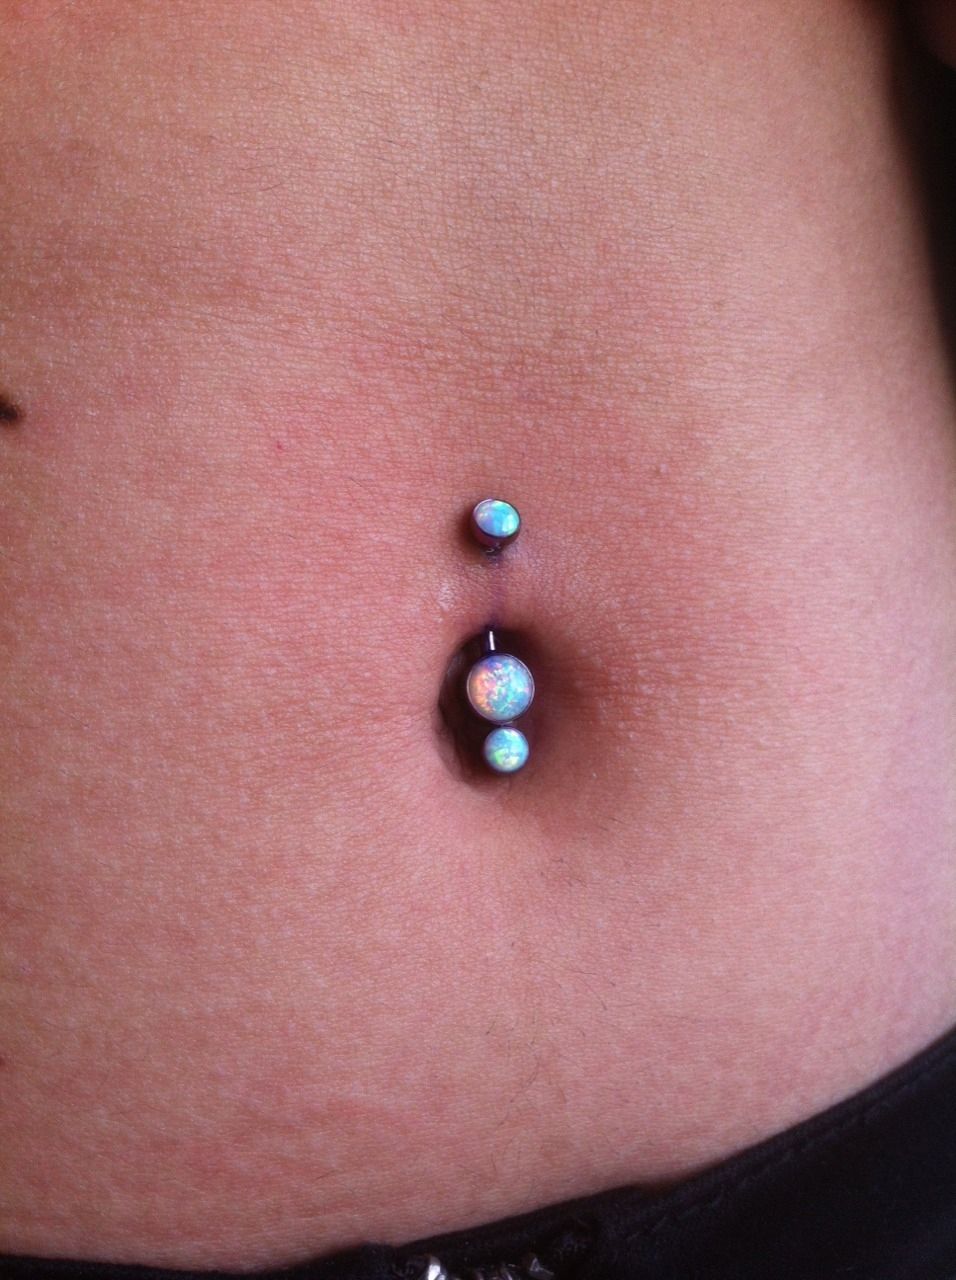 Navel I Did Earlier With This Rad Purpletitanium | Anatometal Regarding Most Popular Chevron Belly Button Rings (View 15 of 15)